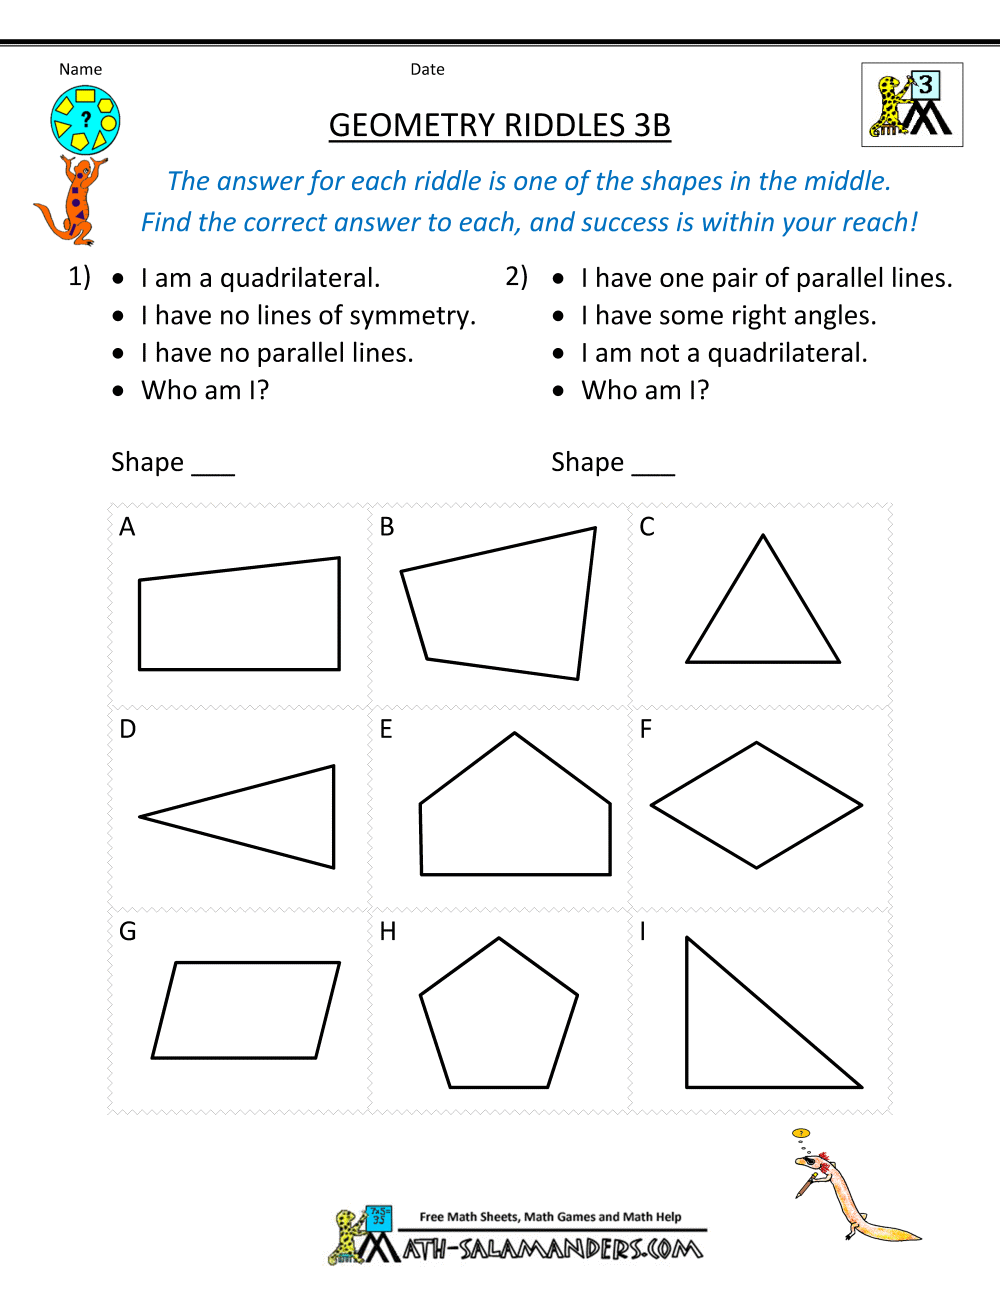 Printables Math Puzzle Worksheets For Middle School geometry worksheets printable riddles 3b